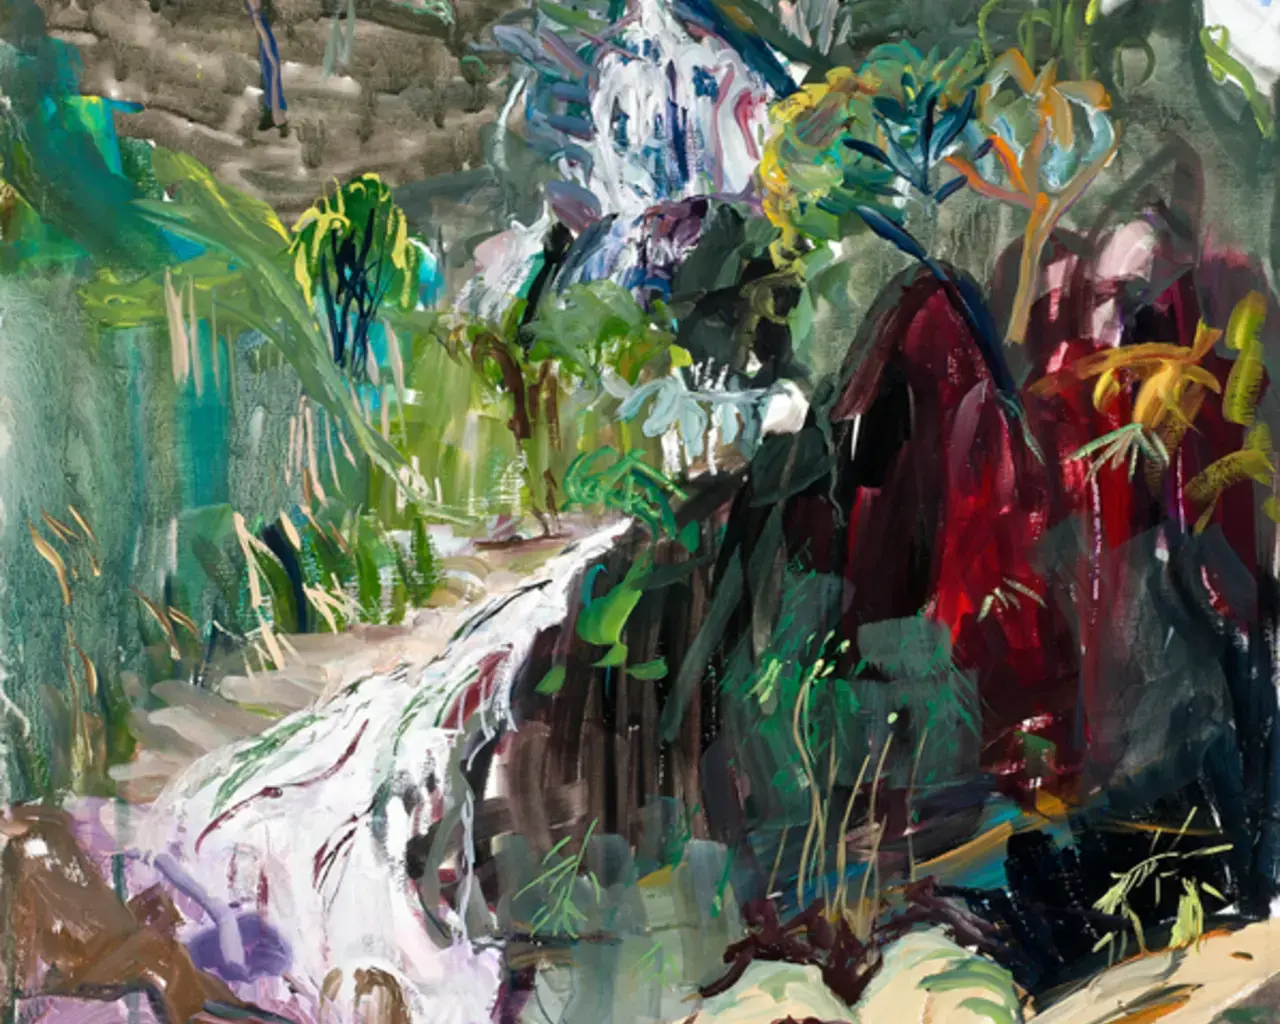 Jane Irish, The Waterfall Plunges in the Mist, 2010. Painted in Sa Pa, Vietnam. Photo courtesy of the artist.